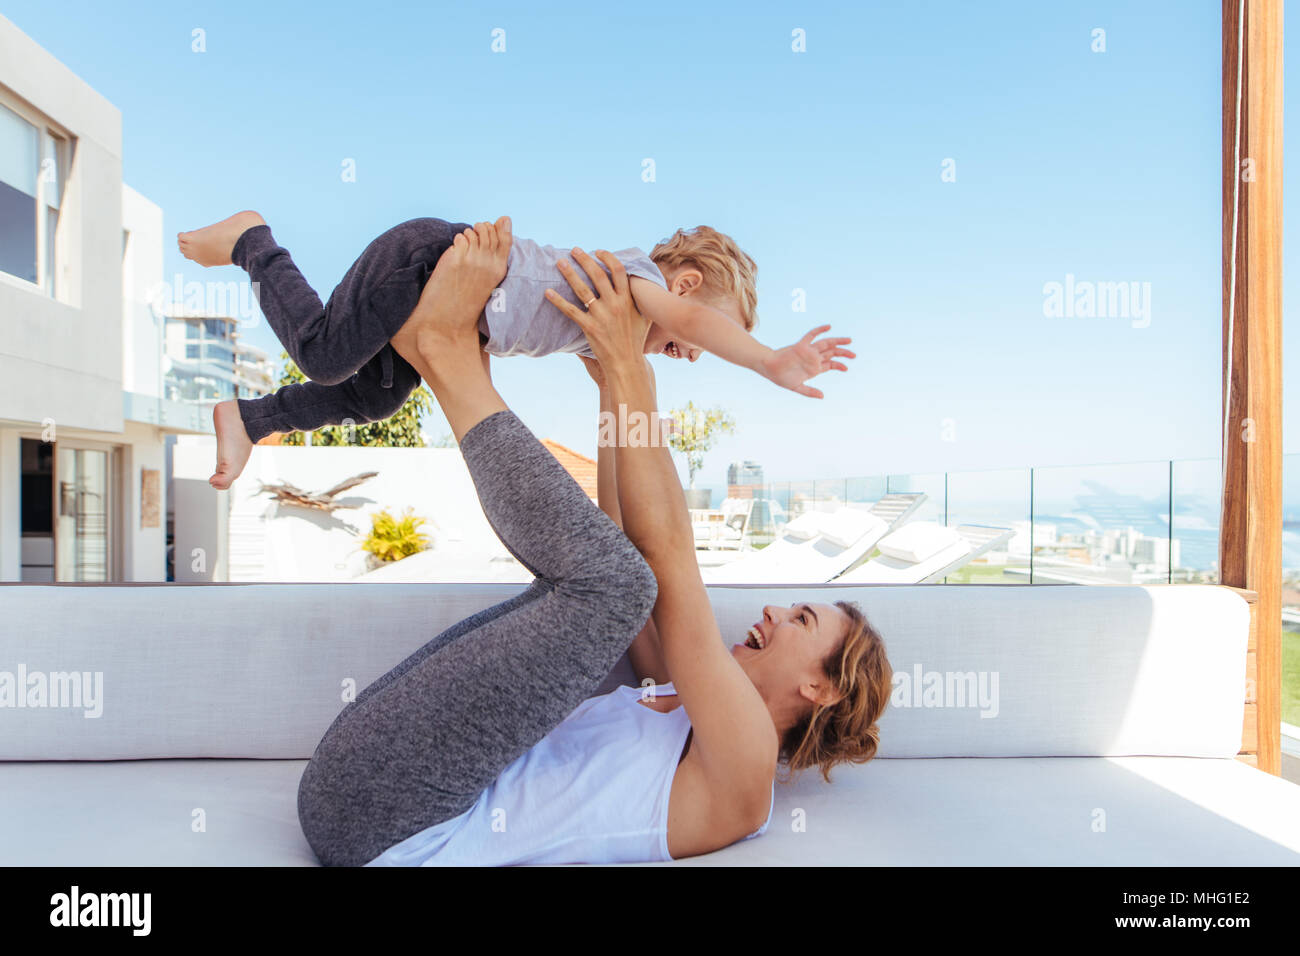 Side view of happy young mother playing with son on the sofa. Woman lying on couch and lifting a little boy with her legs. Stock Photo